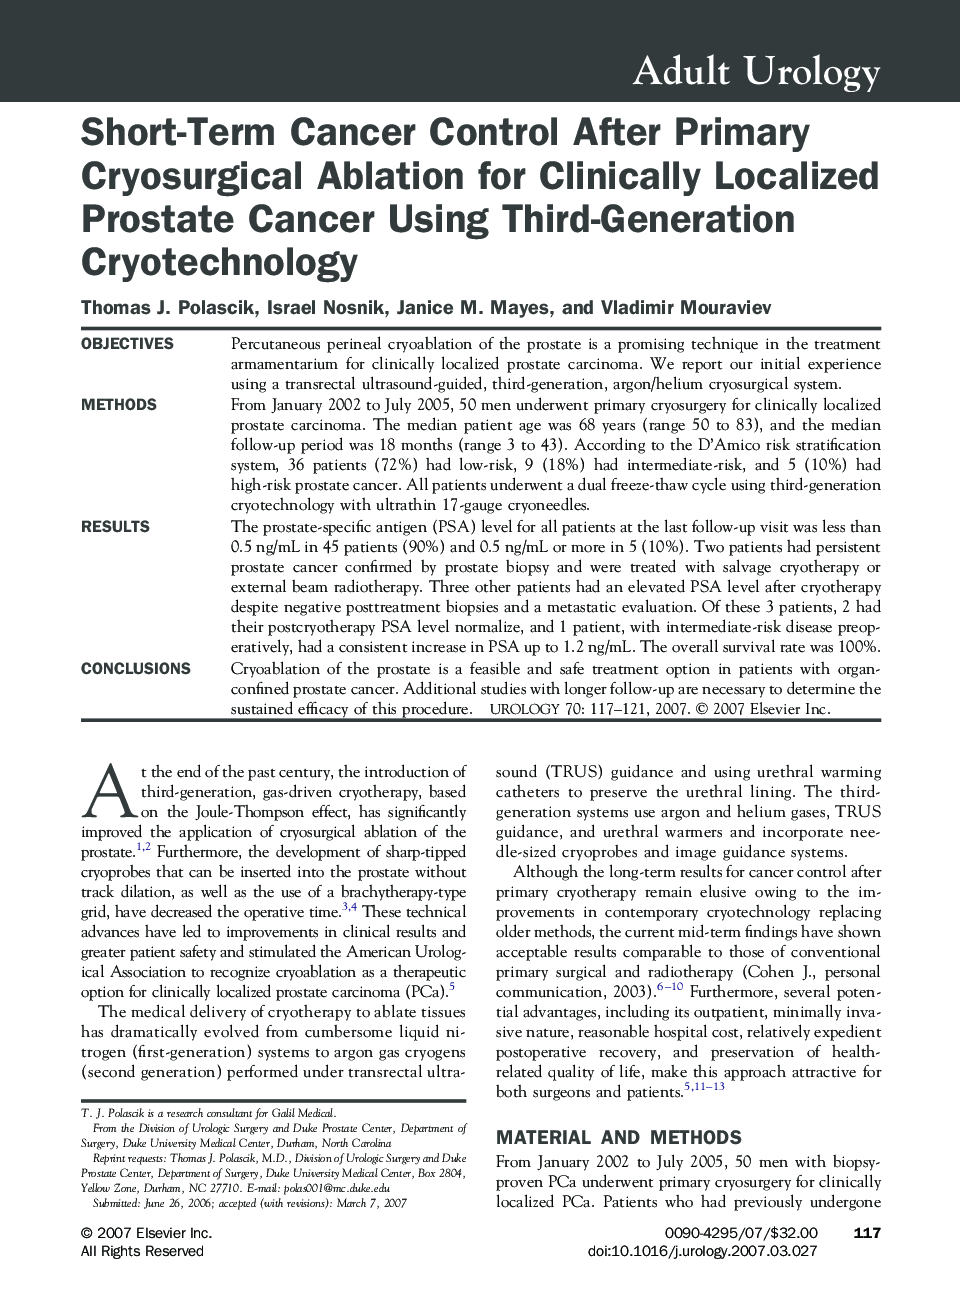 Short-Term Cancer Control After Primary Cryosurgical Ablation for Clinically Localized Prostate Cancer Using Third-Generation Cryotechnology